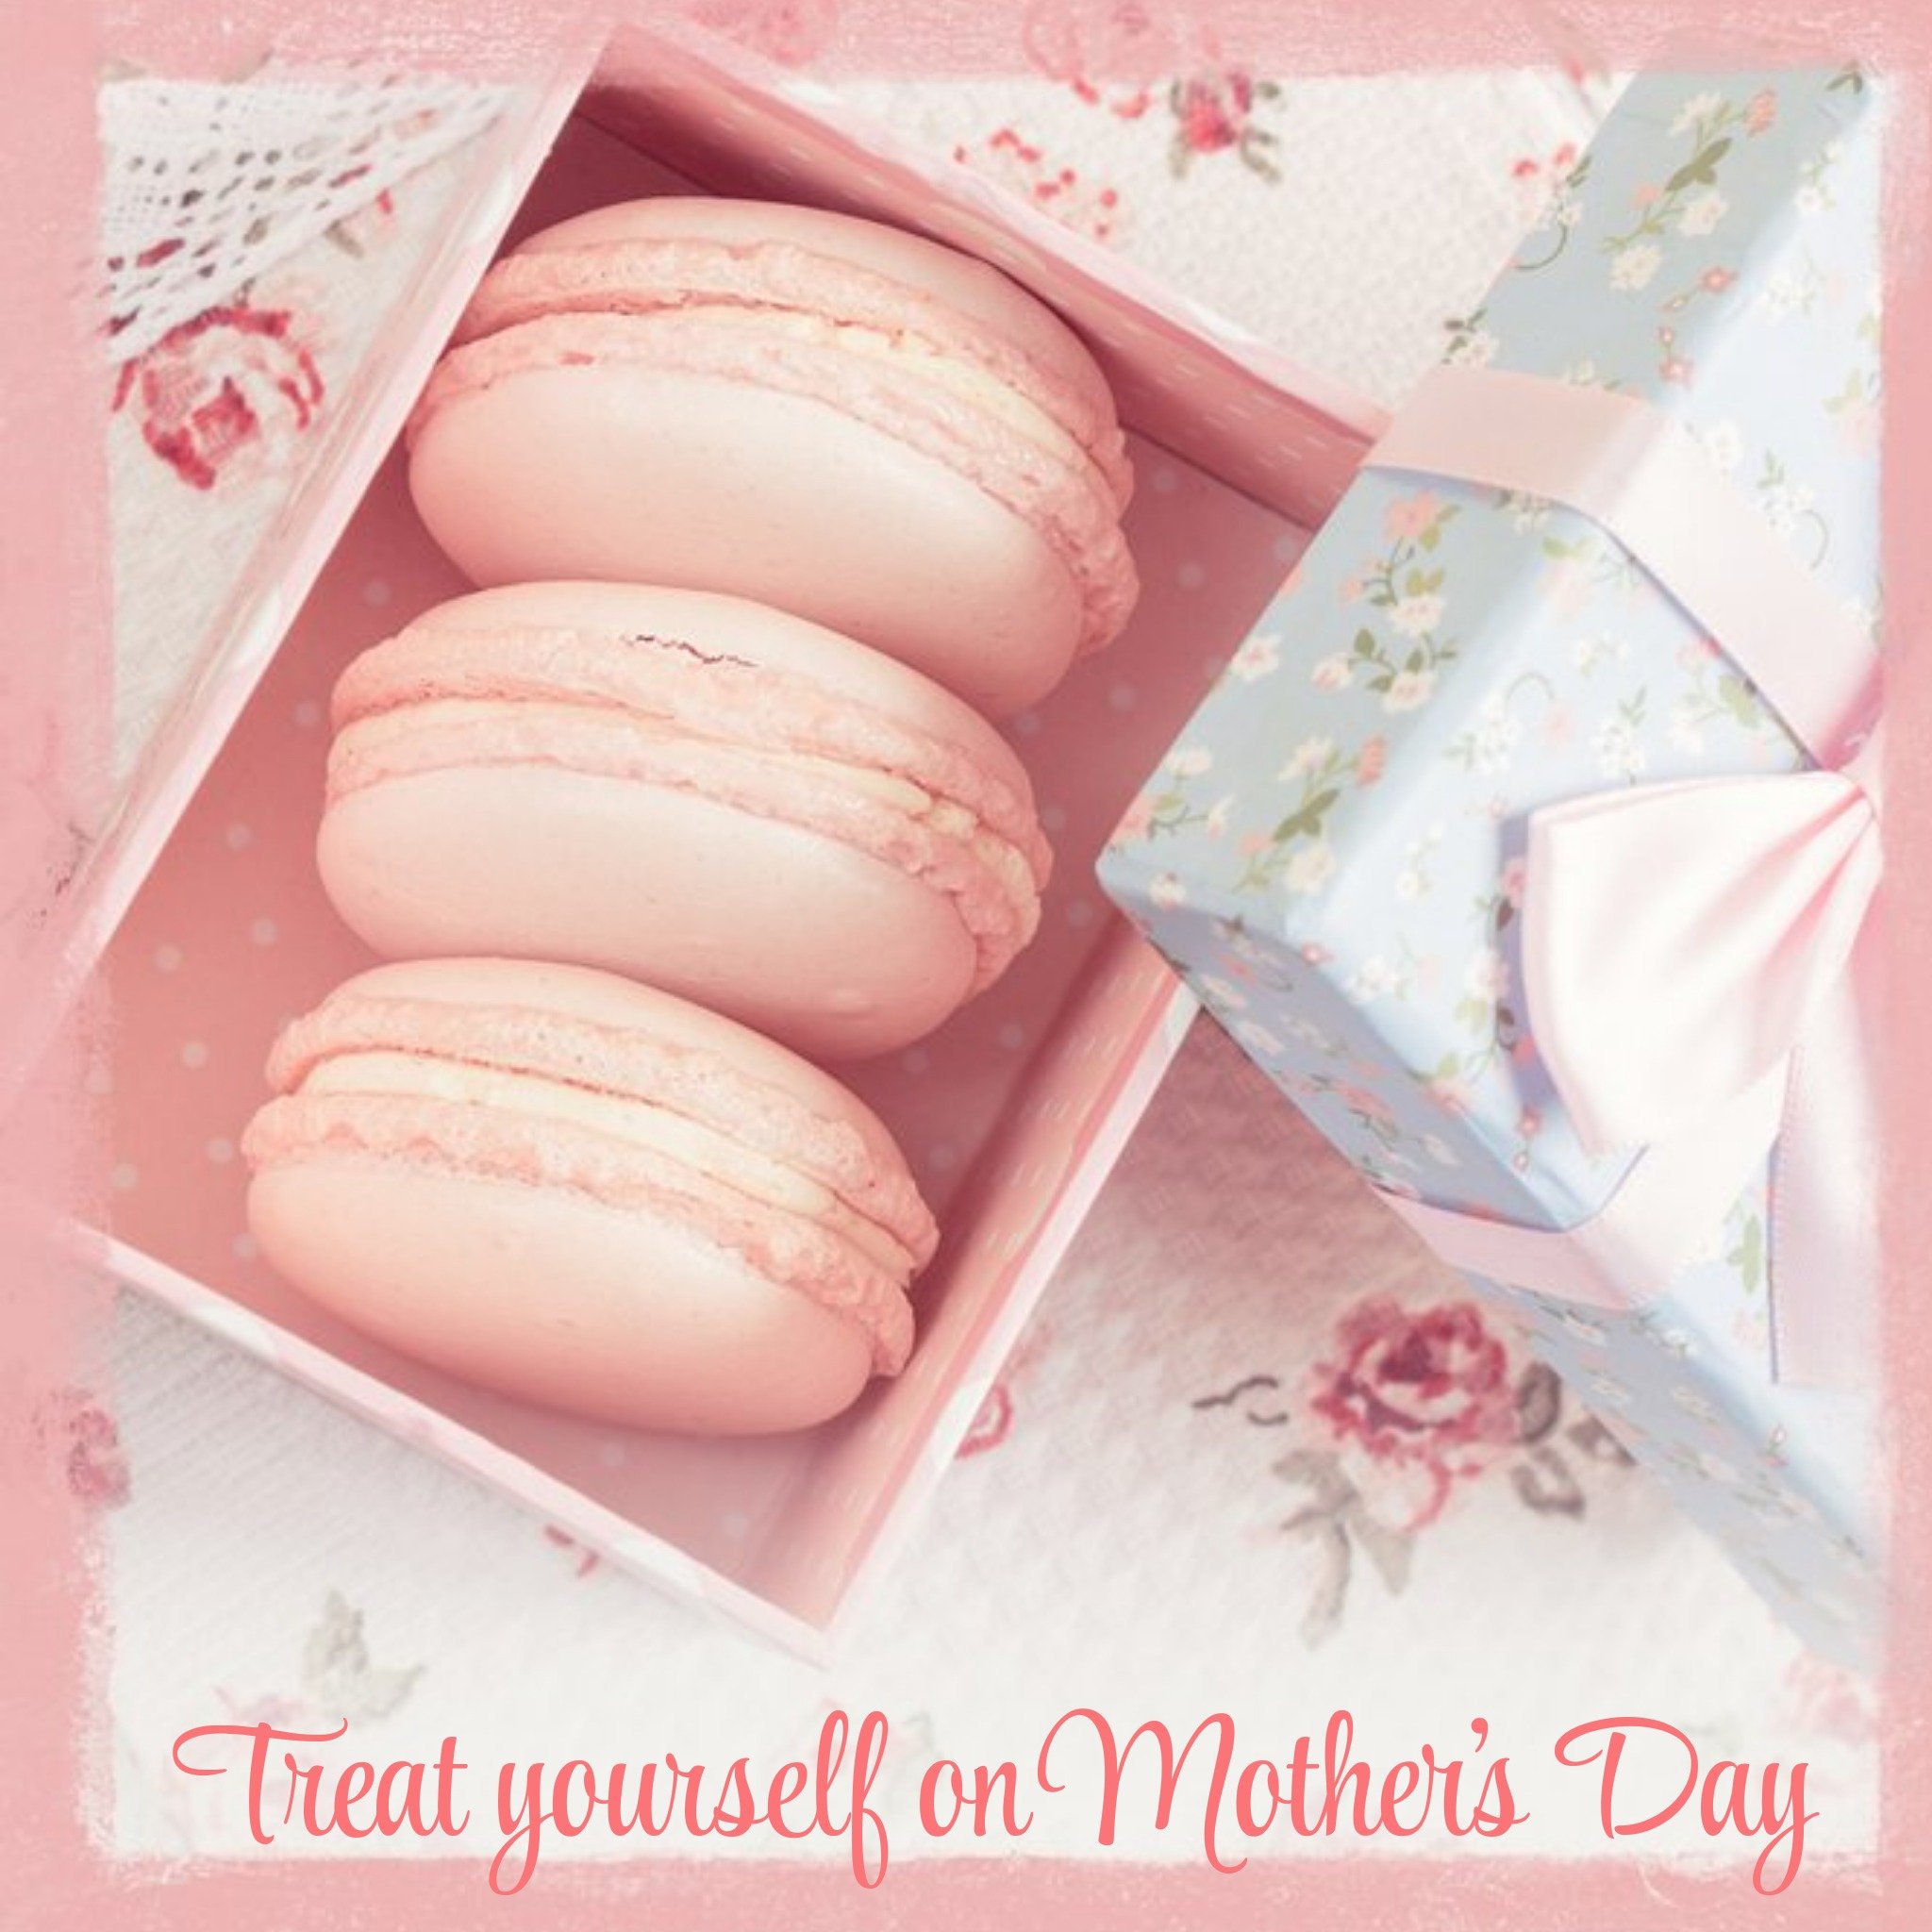 Moonpig Pink Macarons Treat Yourself On Mother's Day Card, Square